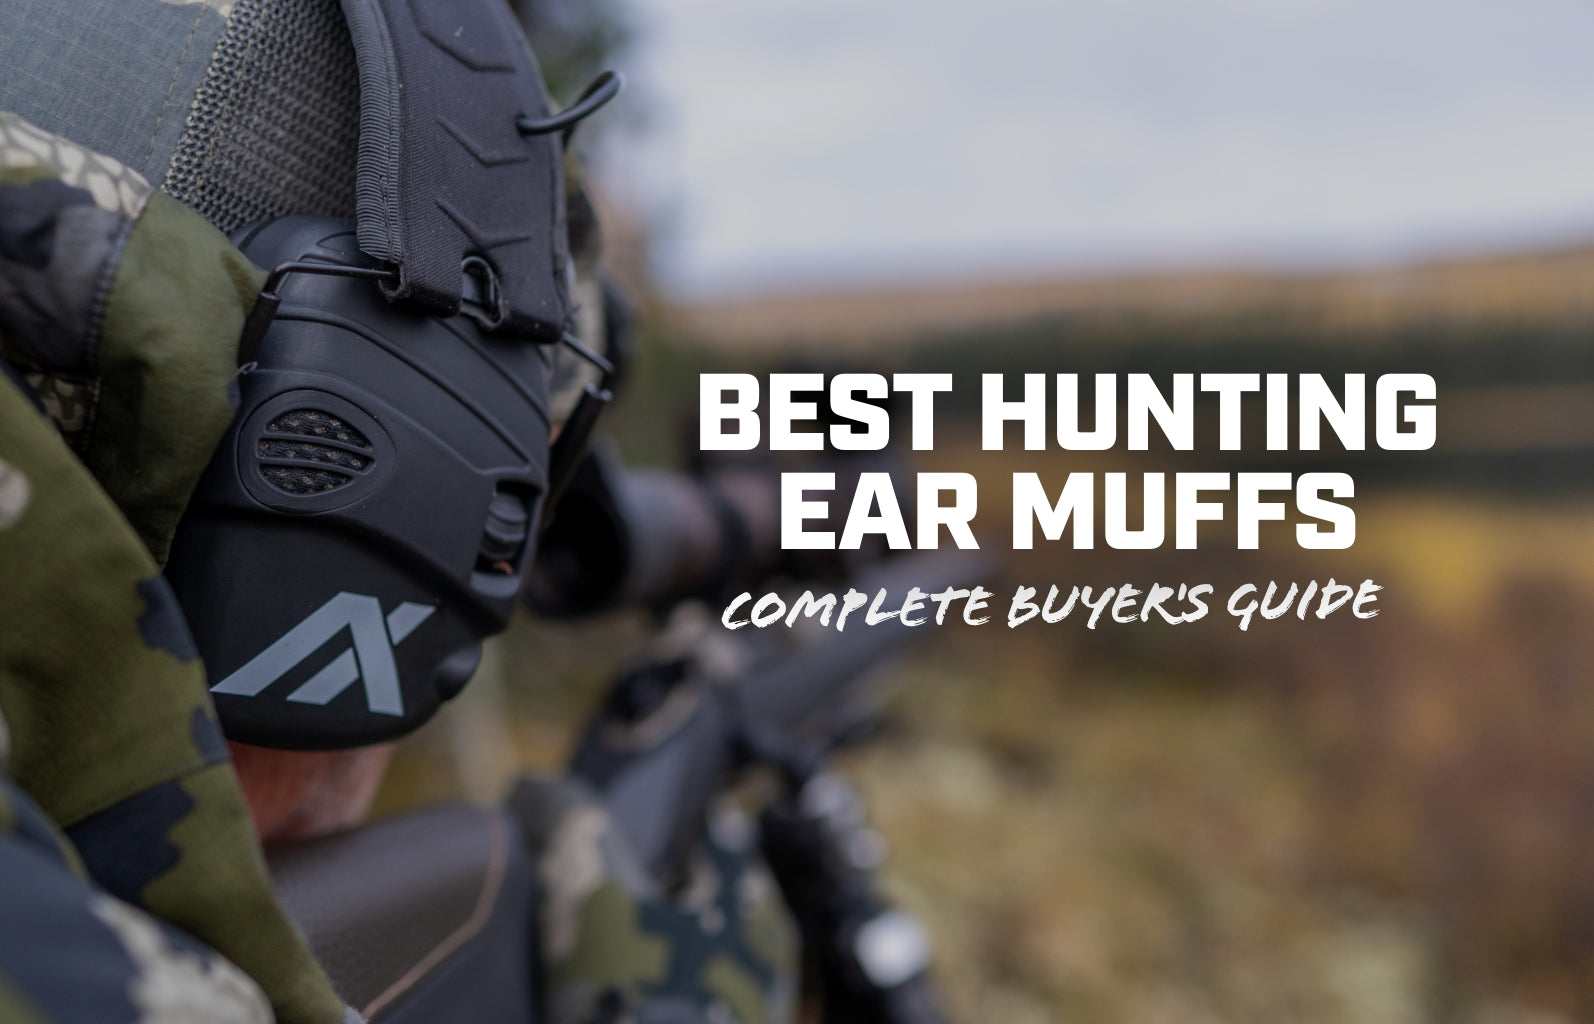 Best Hunting Earmuffs: Combining Safety with Performance